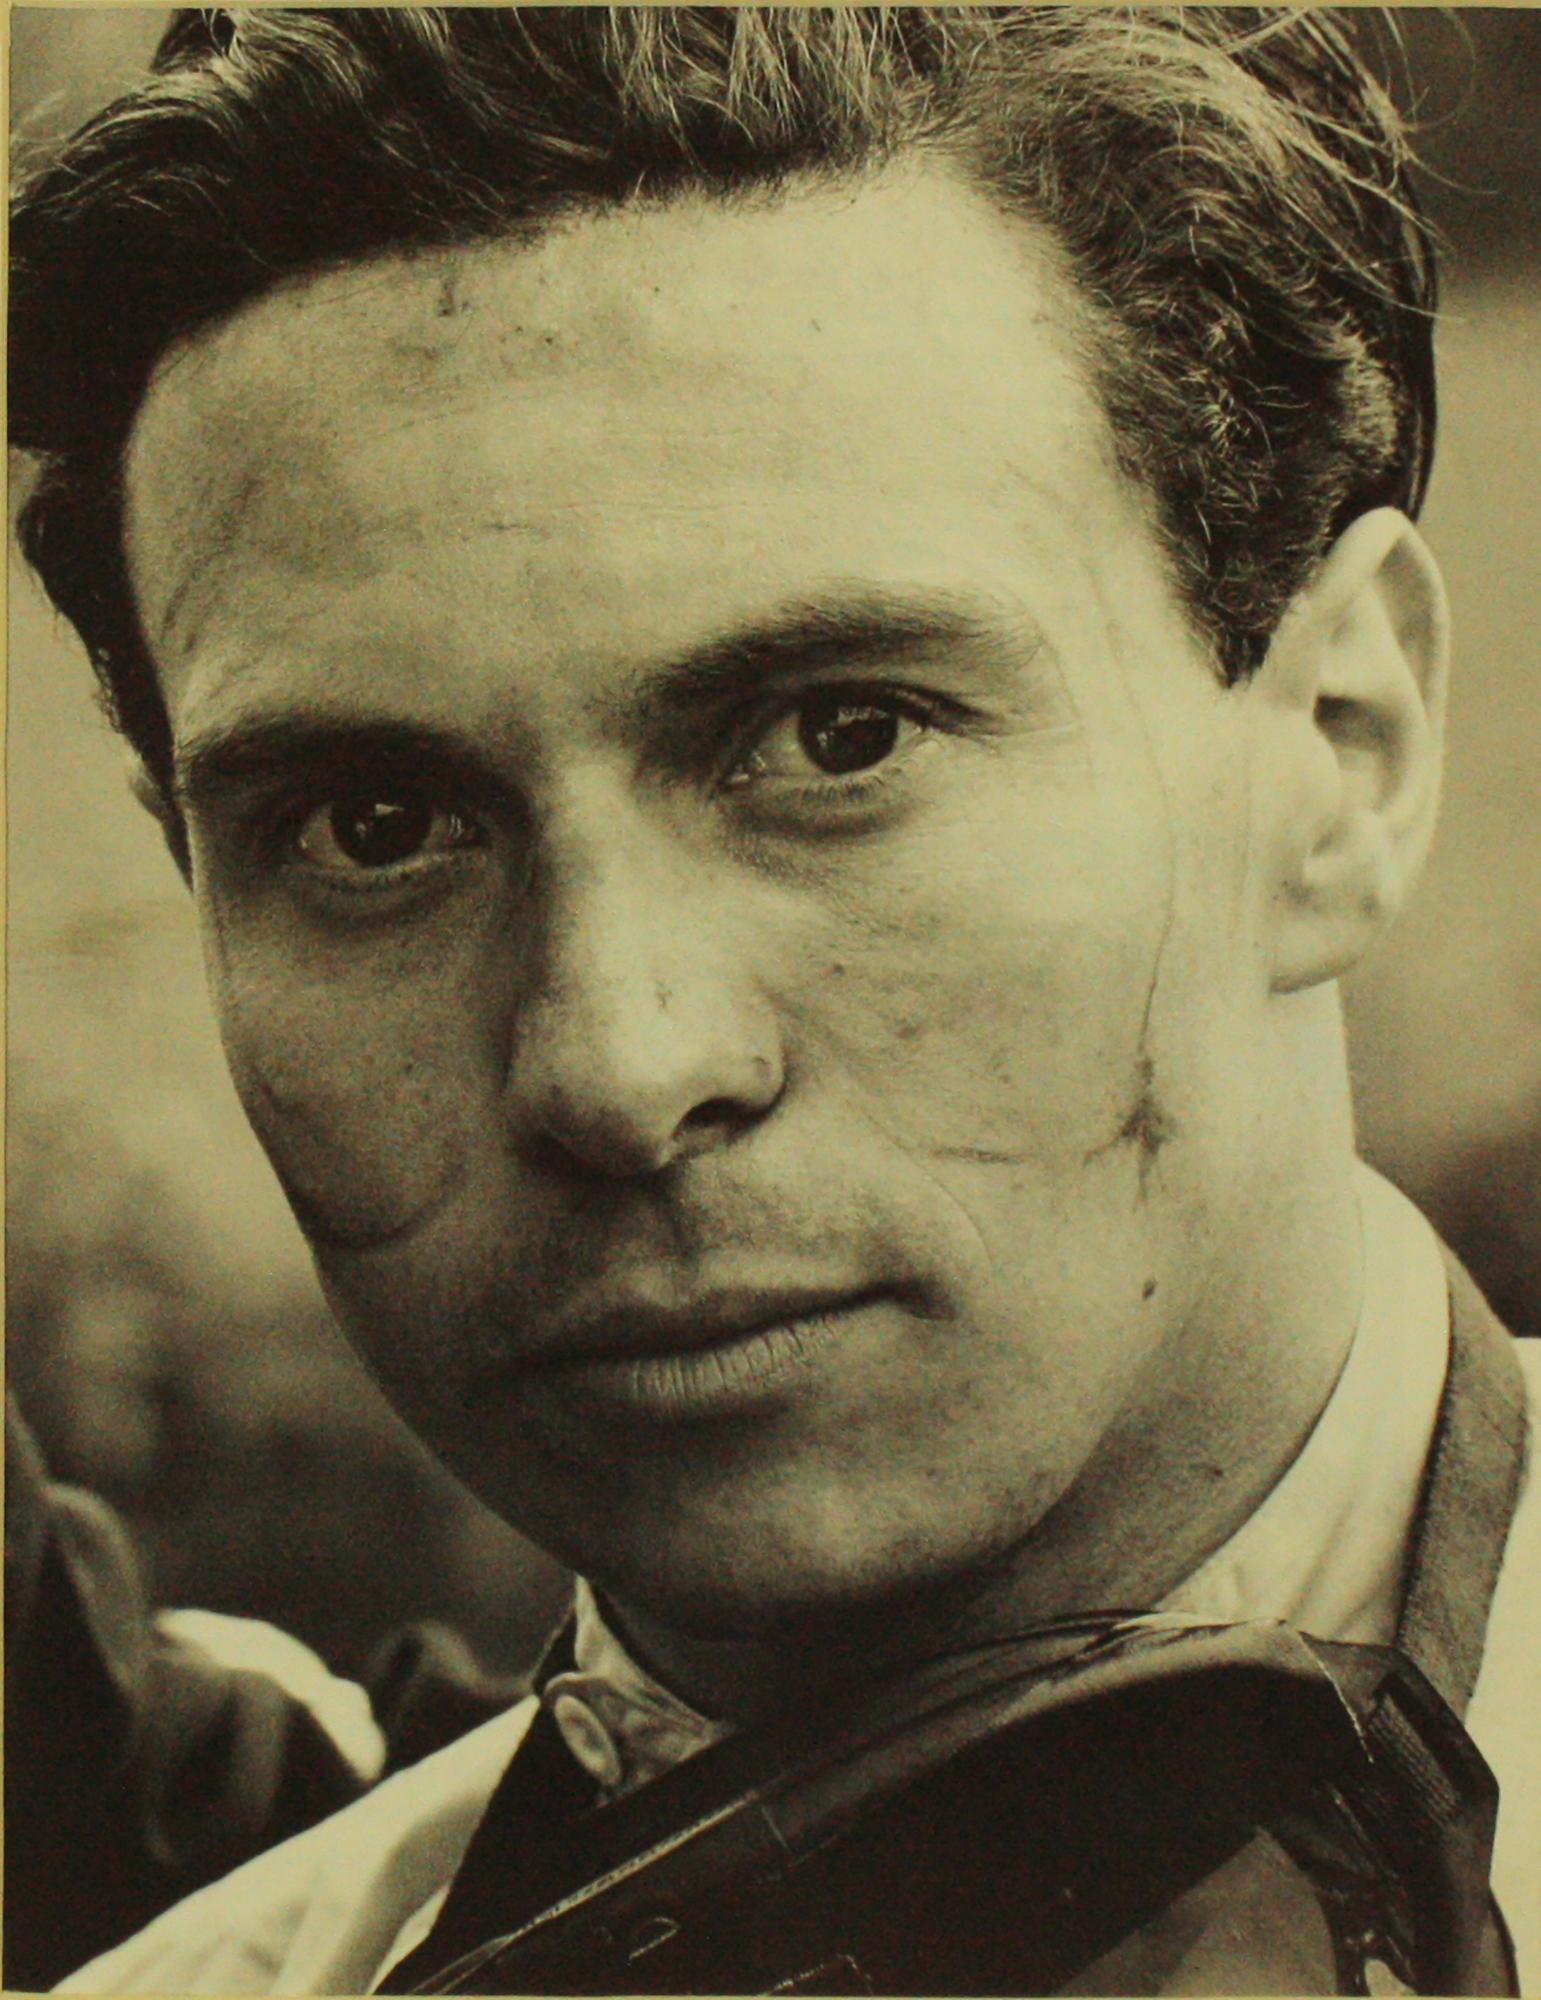 Jim Clark at the Belgium Grand Prix 1962 - Photograph by Unknown